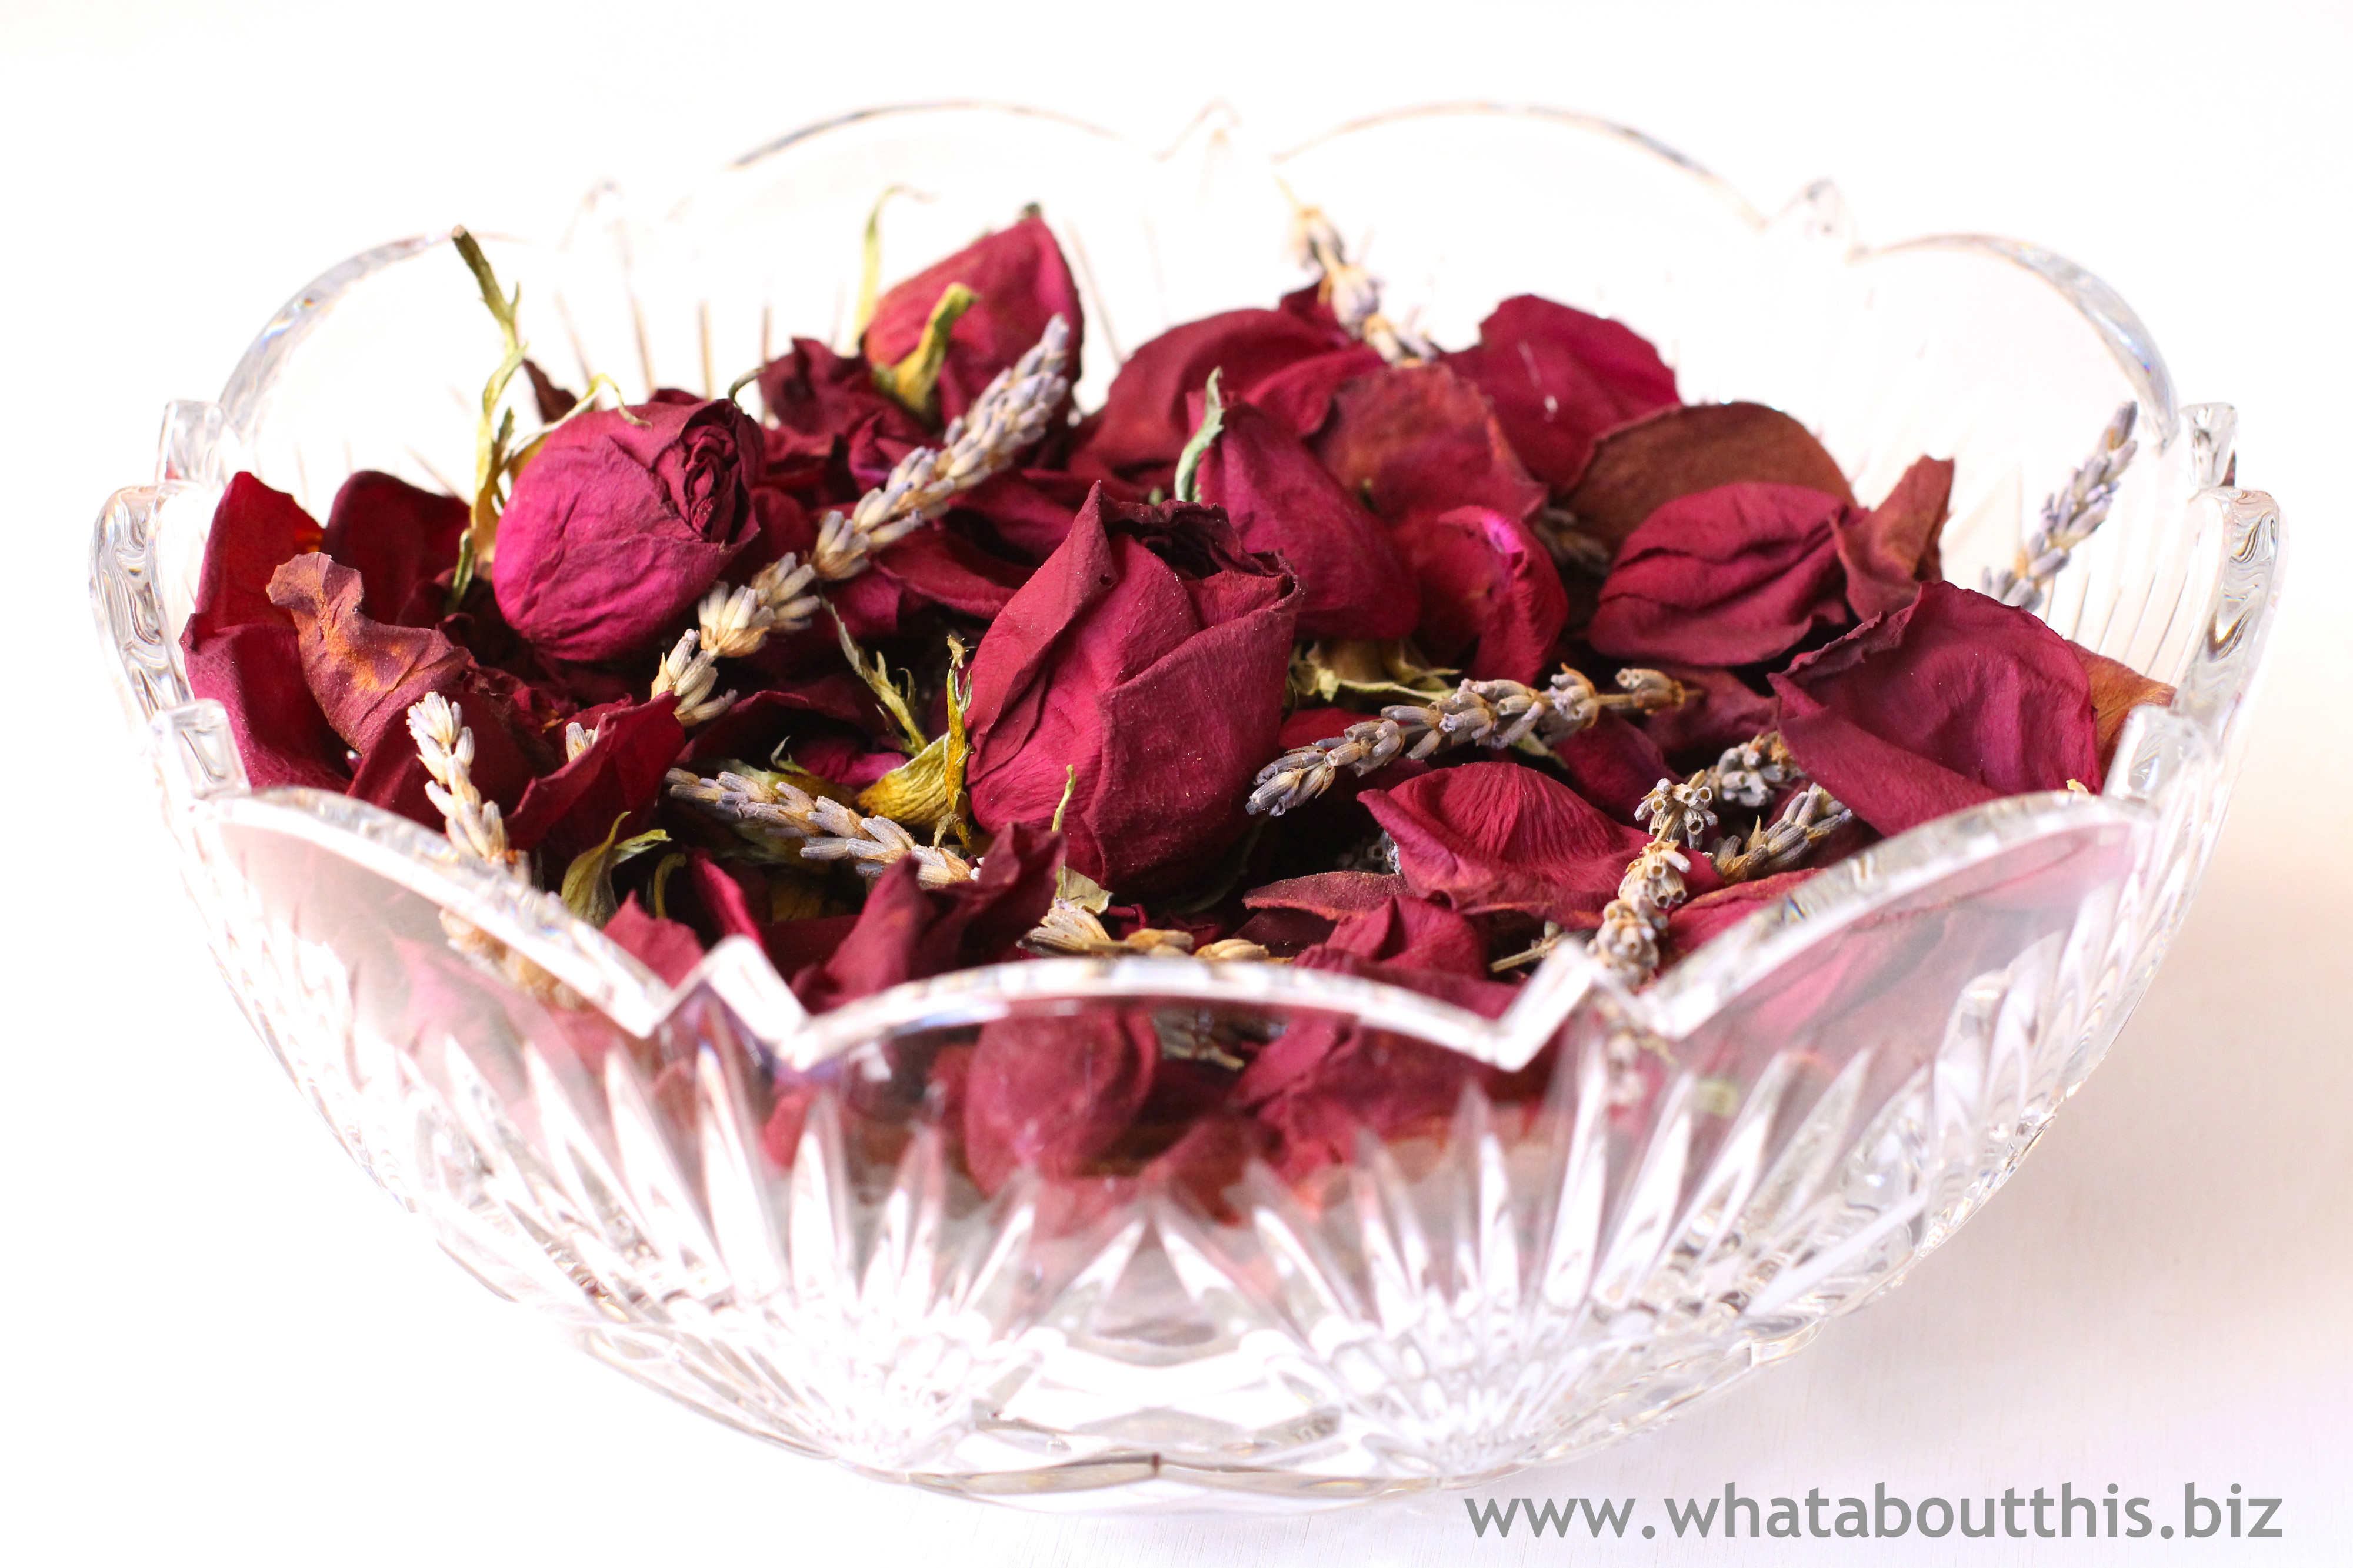 Homemade Potpourri with Rose Petals and Lavender | What about this?